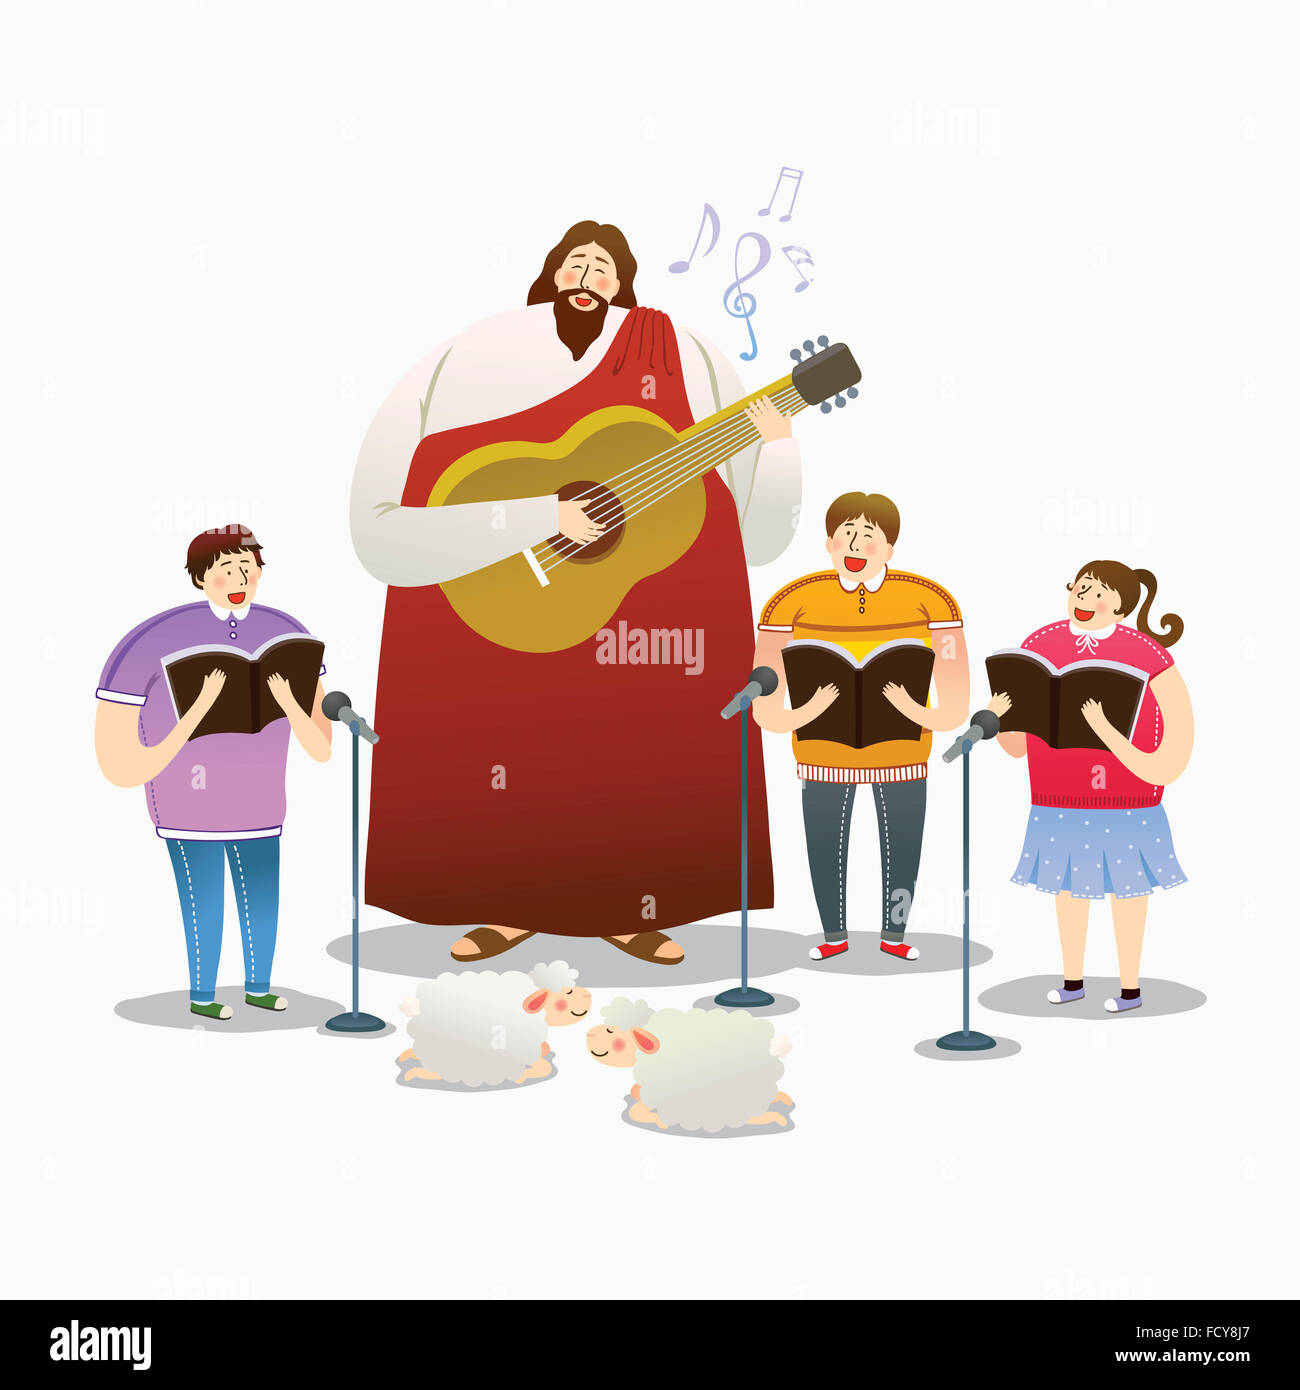 Jesus Christ playing guitar and people singing hymns together Stock Photo -  Alamy